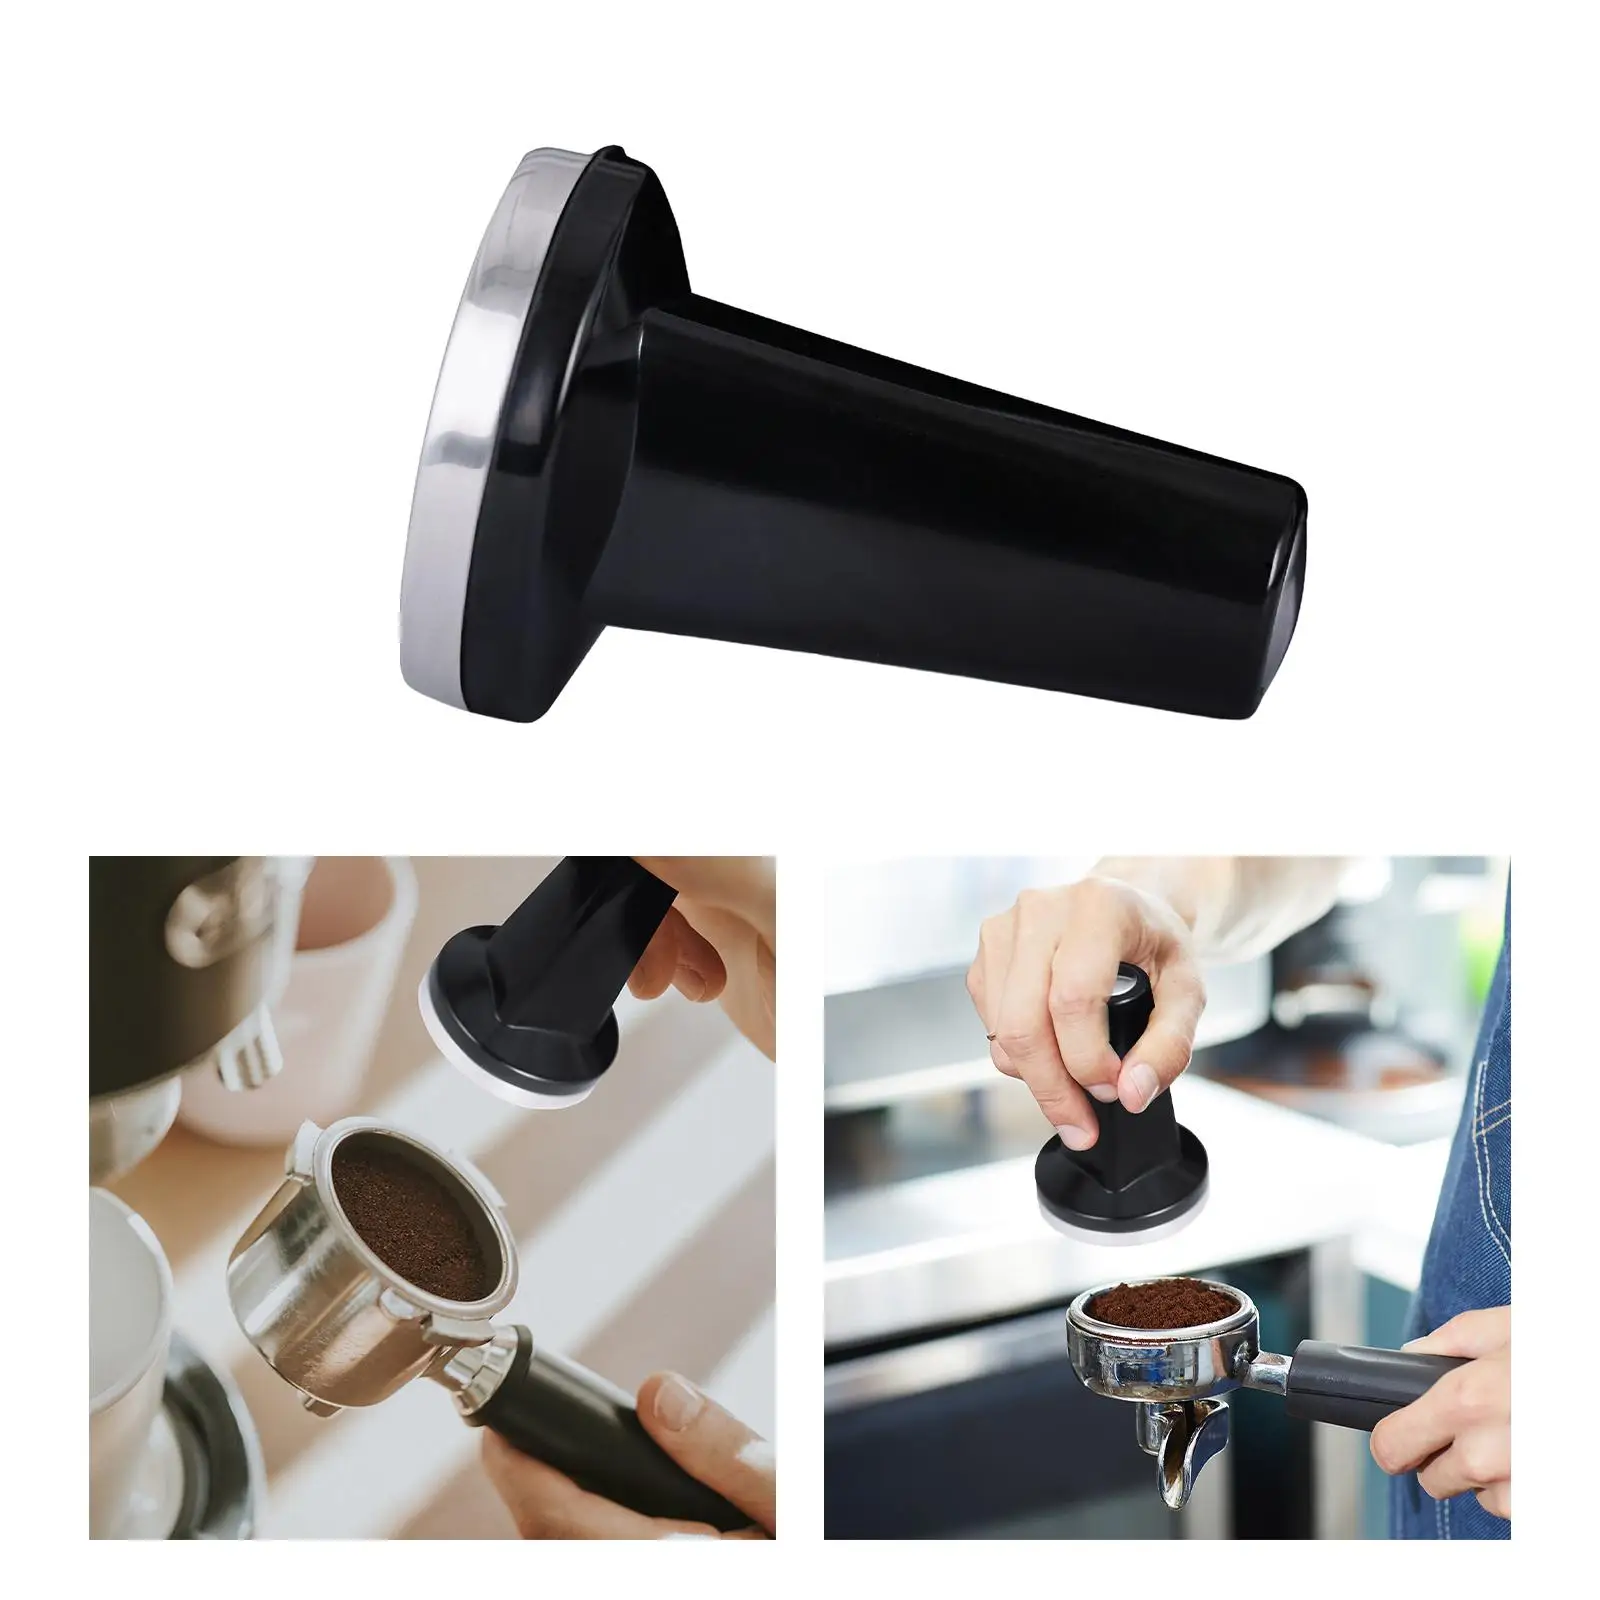 Coffee Tamper Coffee Distributor Espresso Distribution Tool Easy to Clean for Cafe Shop